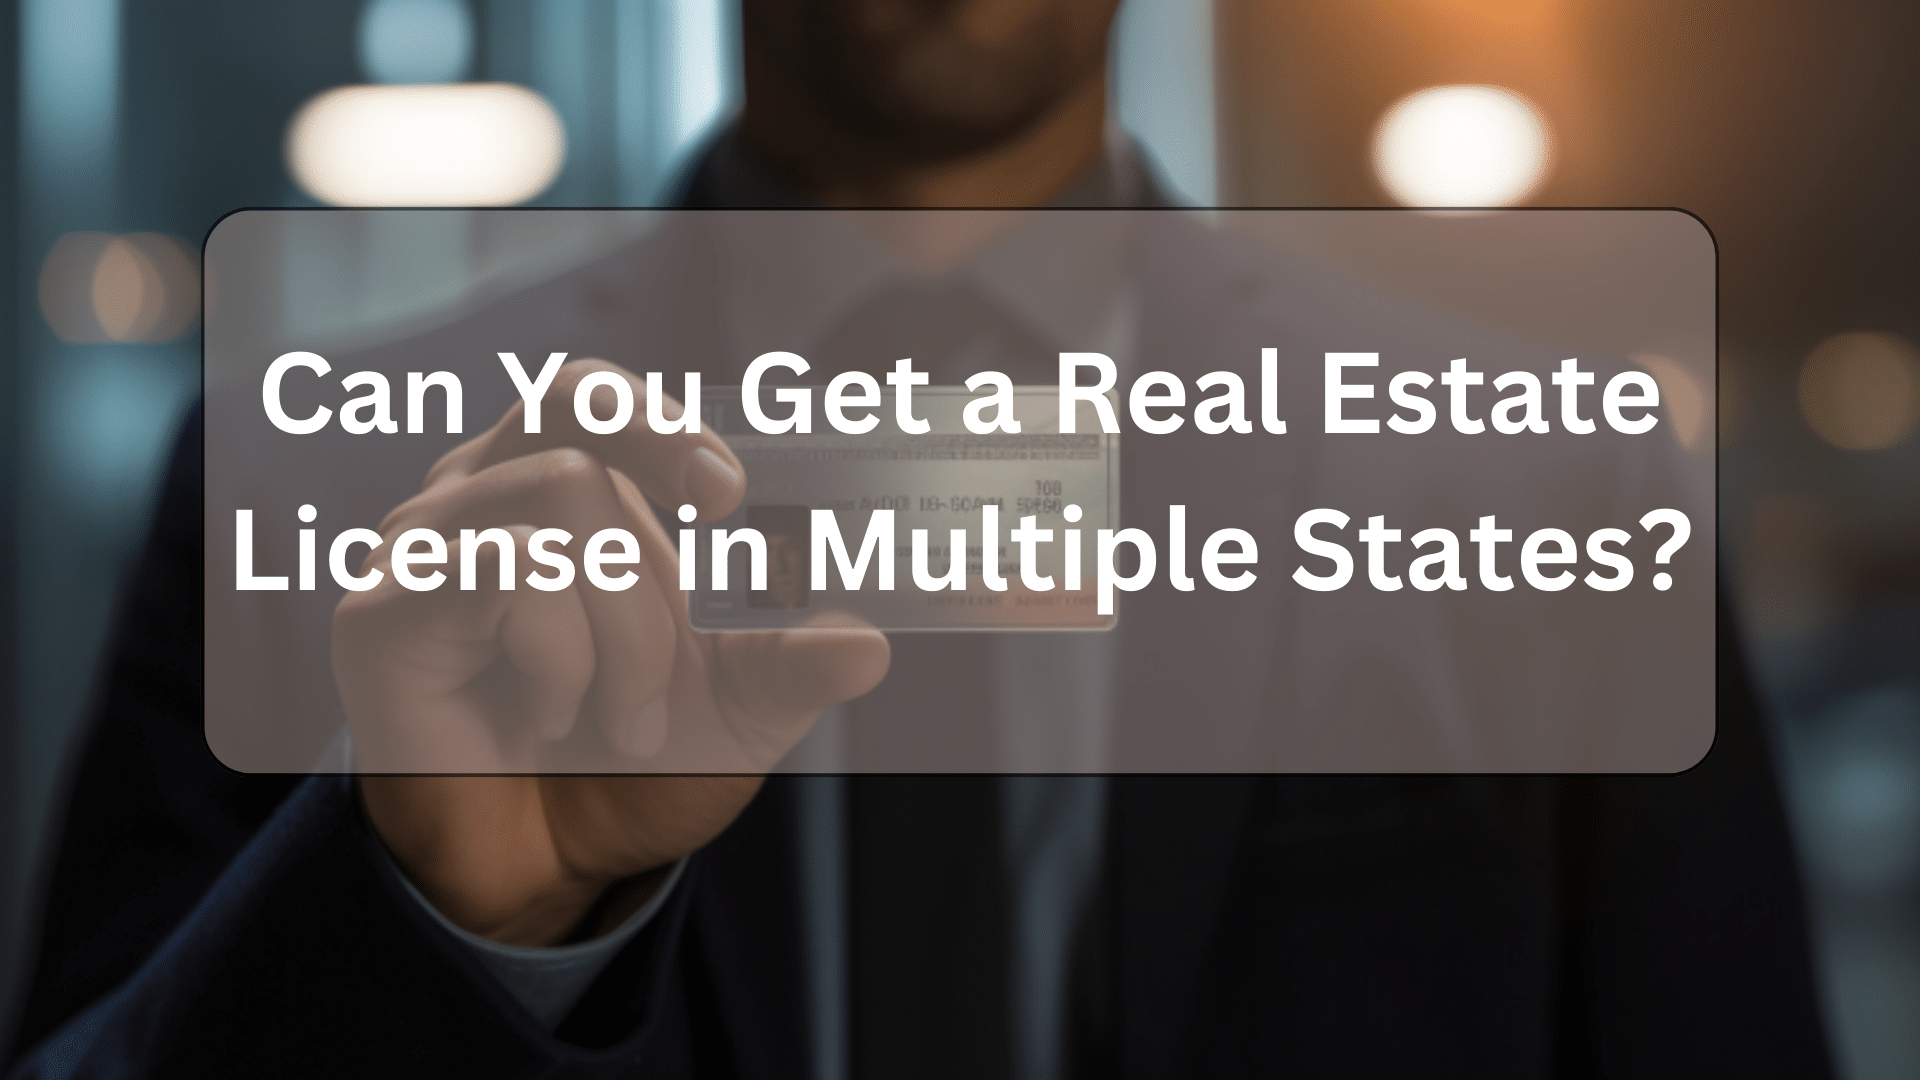 Can you get a real estate license in multiple states?